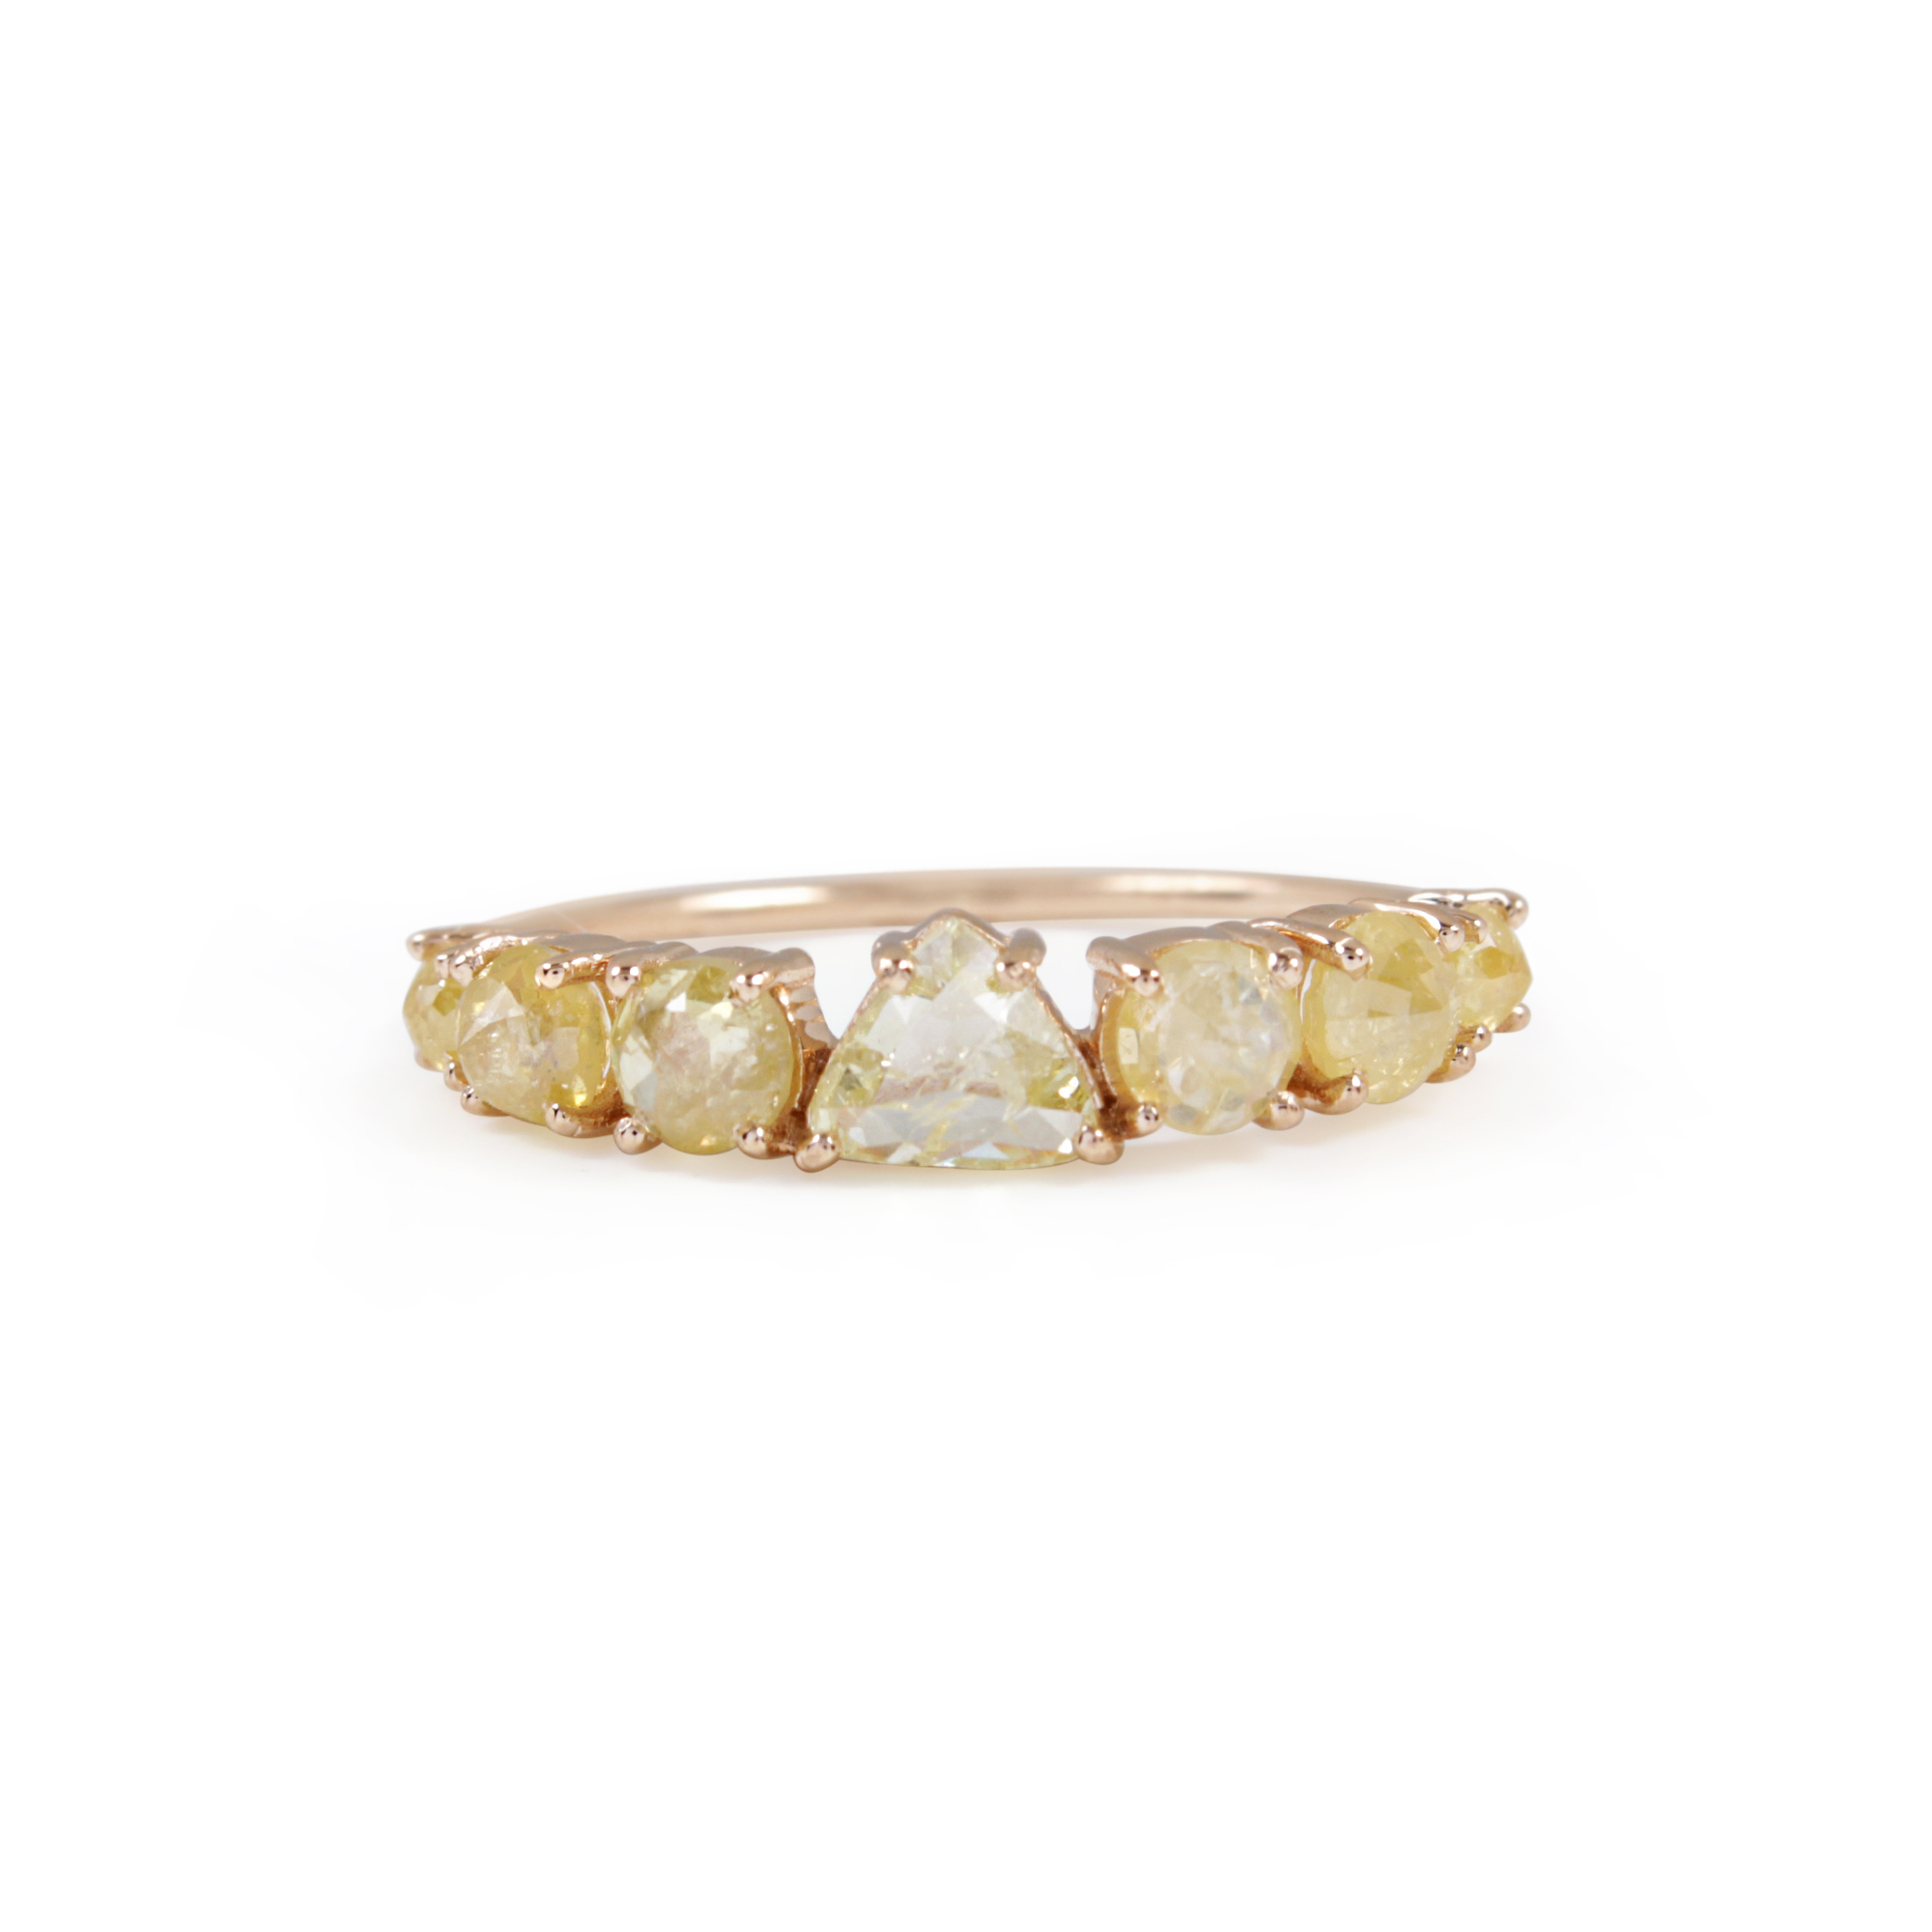 14K Solid Gold Pave Diamond Ring Jewelry